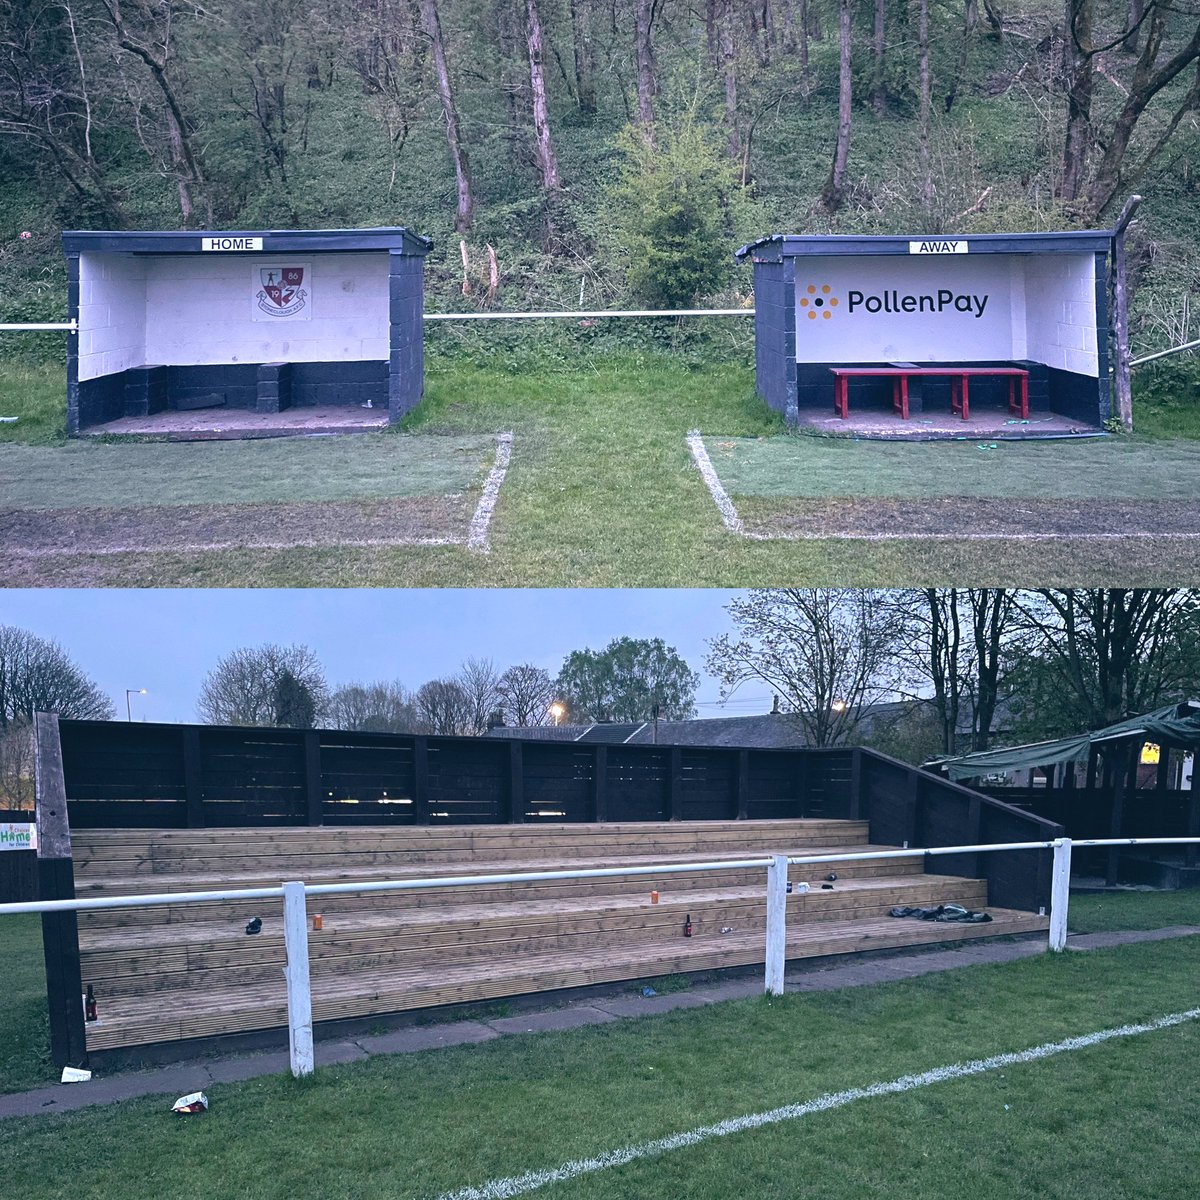 Thursday April 27th 19:01ko
Match 230 of 2022/23
🏟️ Fox Park, Kearsley - new ☑️
Stoneclough @stonecloughfc1 5
Haslingden St Marys @HassyMarysFC 2
@westlancsleague West Lancs League Division One
Ground used for filming “The English Game” on Netflix
#groundhopping #kizzyscornerpics